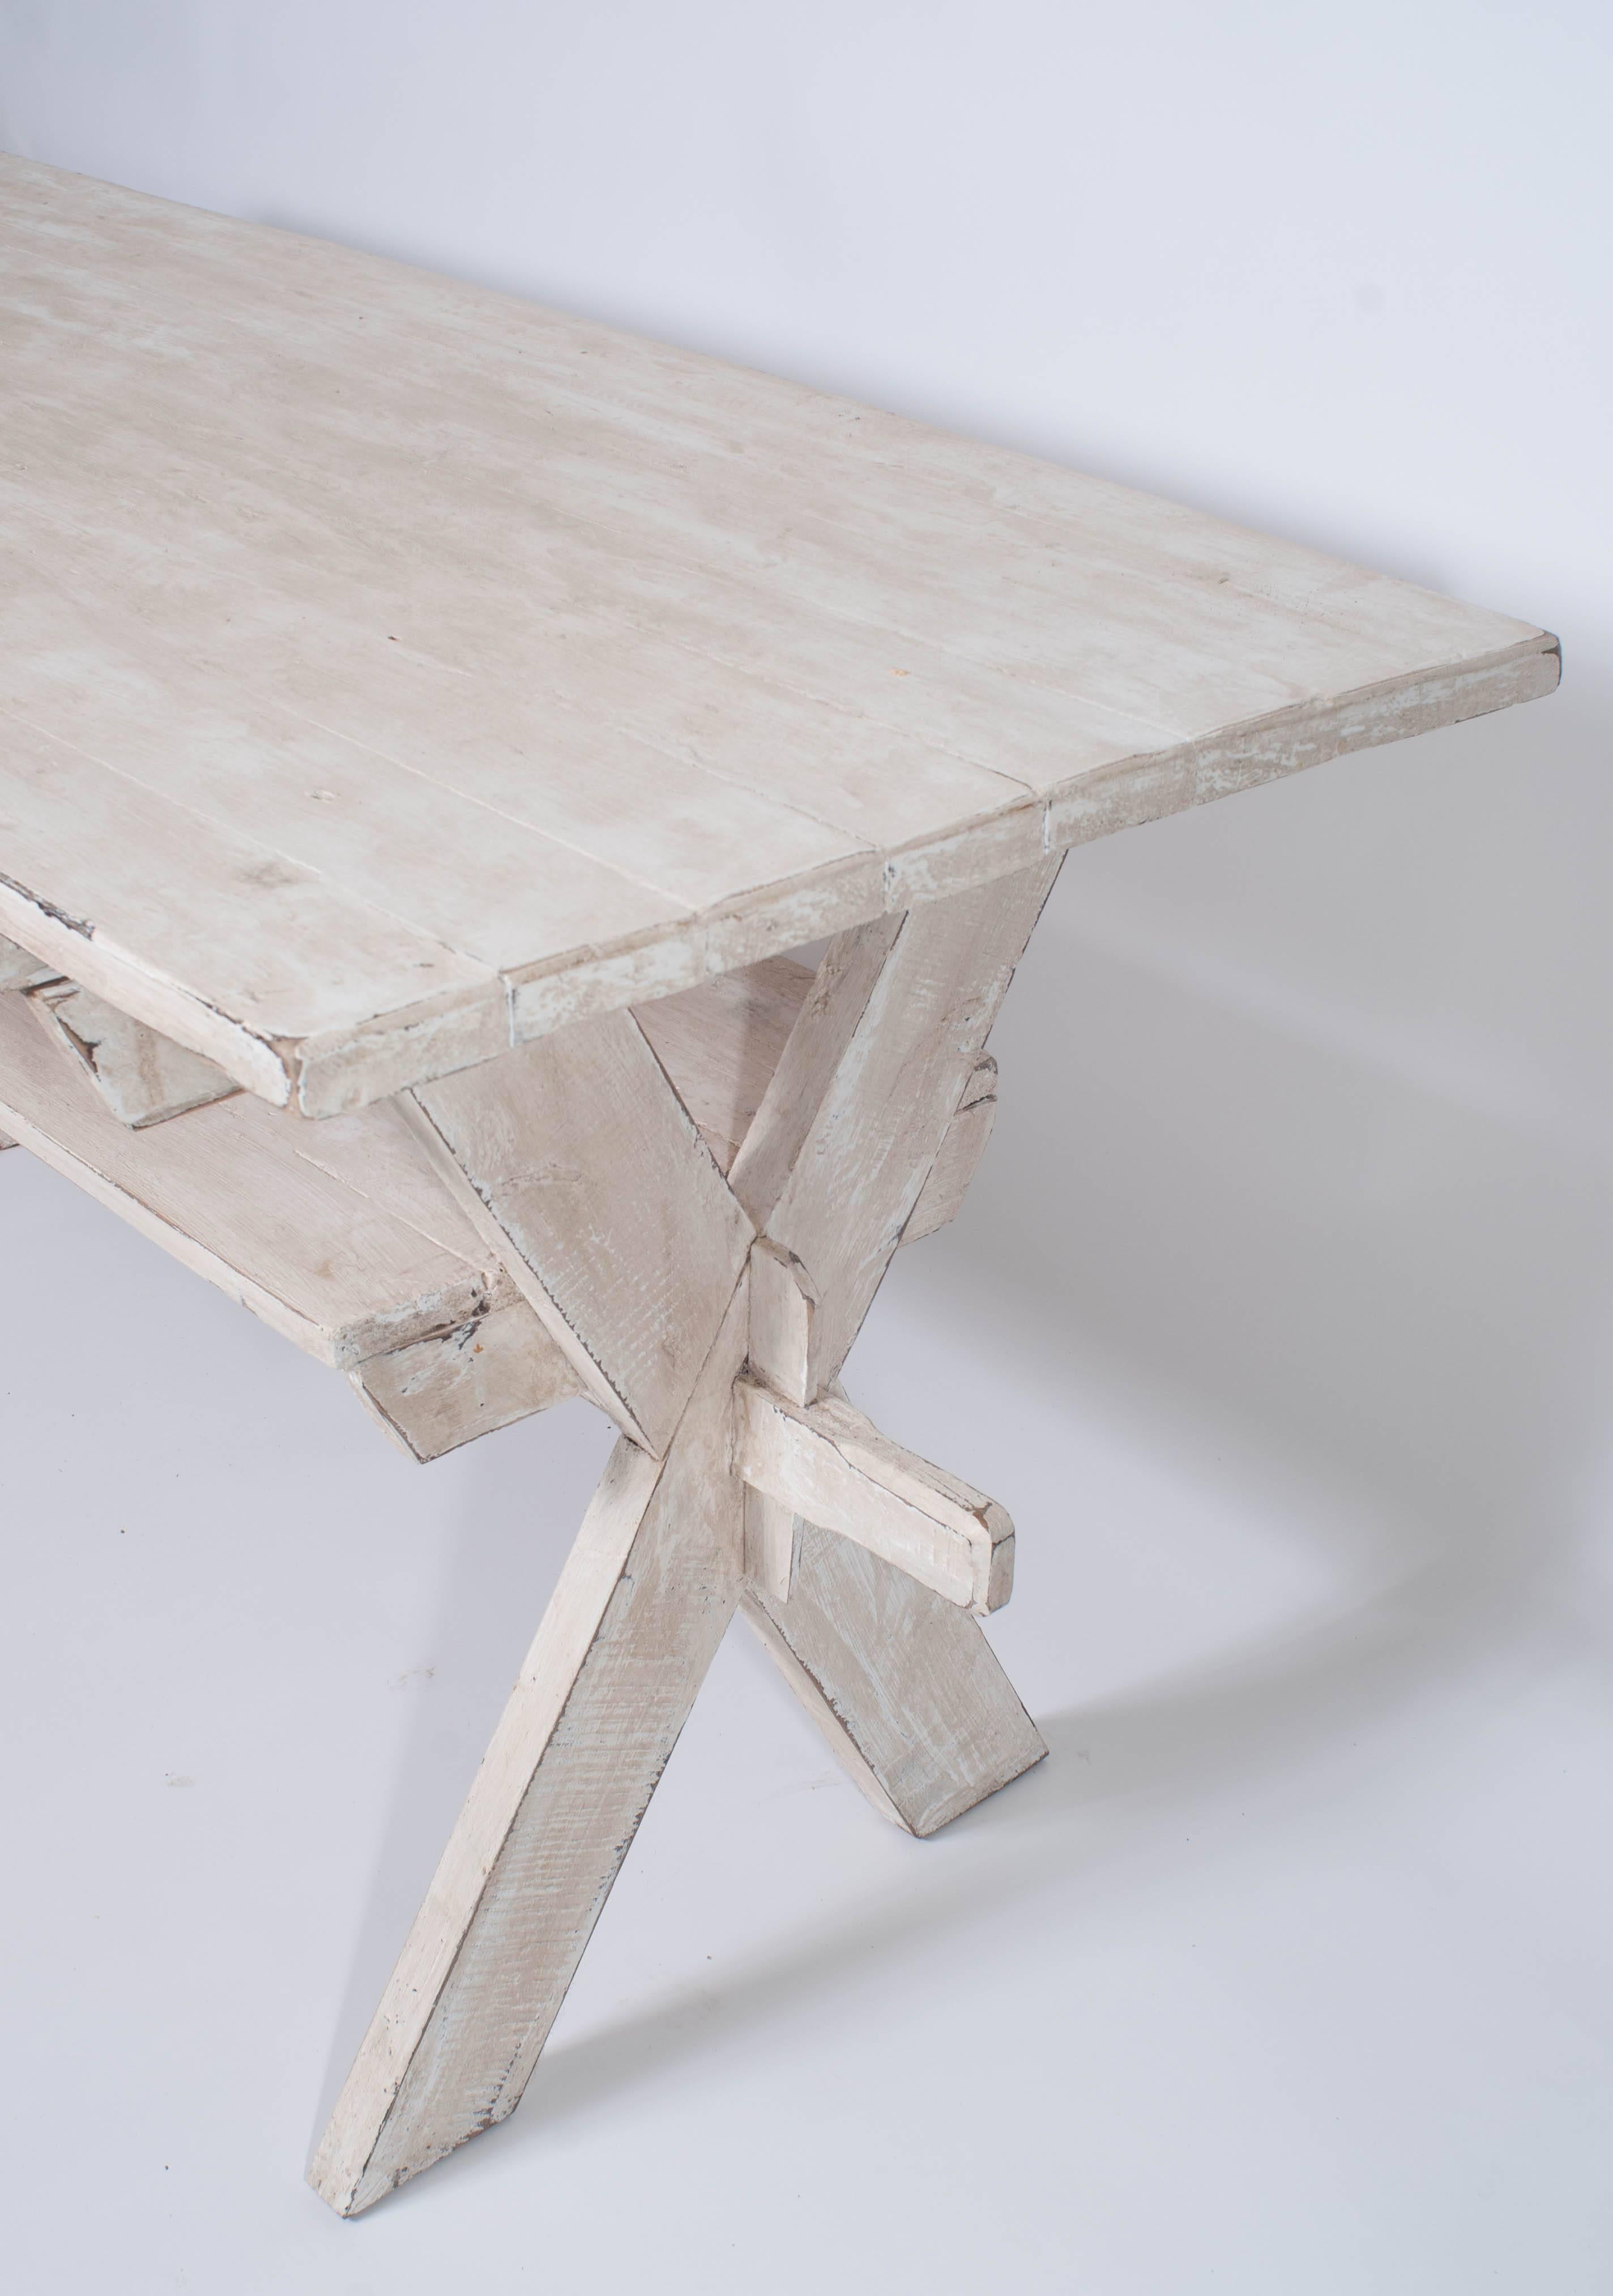 An interesting rustic sawbucks style stretcher base trestle table with a 1.25